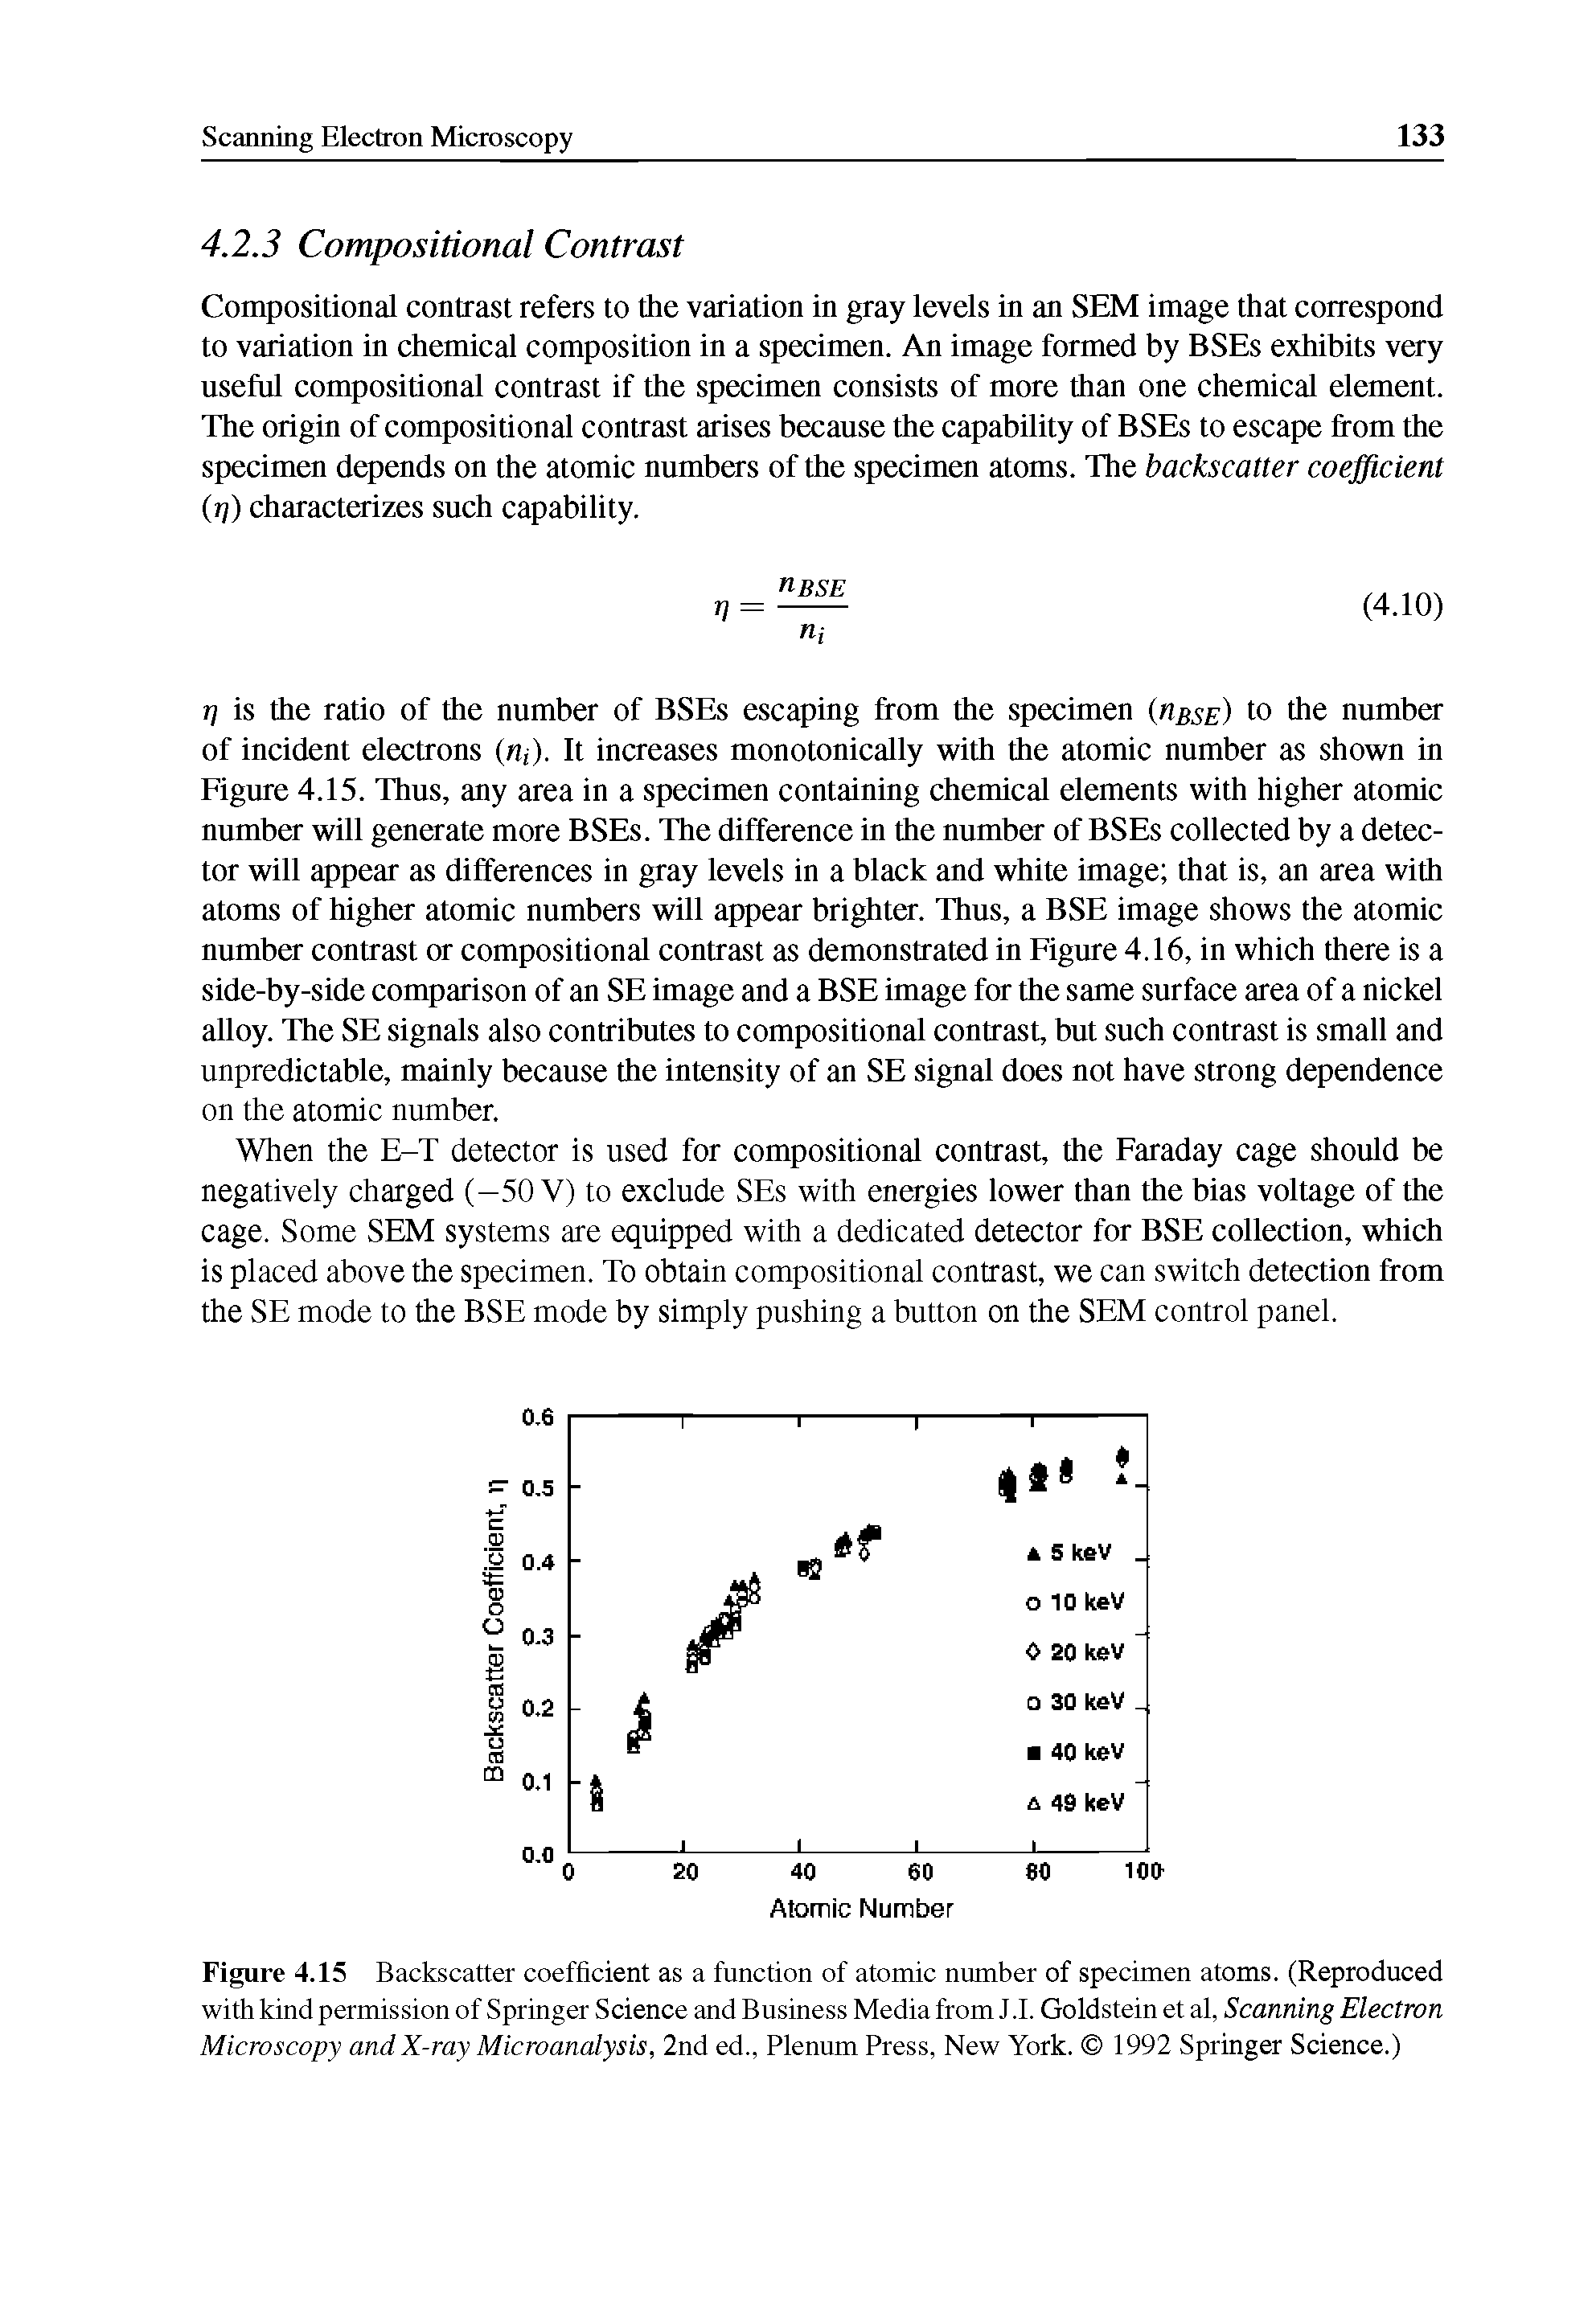 Figure 4.15 Backscatter coefficient as a function of atomic number of specimen atoms. (Reproduced with kind permission of Springer Science and Business Media from J.I. Goldstein et al, Scanning Electron Microscopy and X-ray Microanalysis, 2nd ed., Plenum Press, New York. 1992 Springer Science.)...